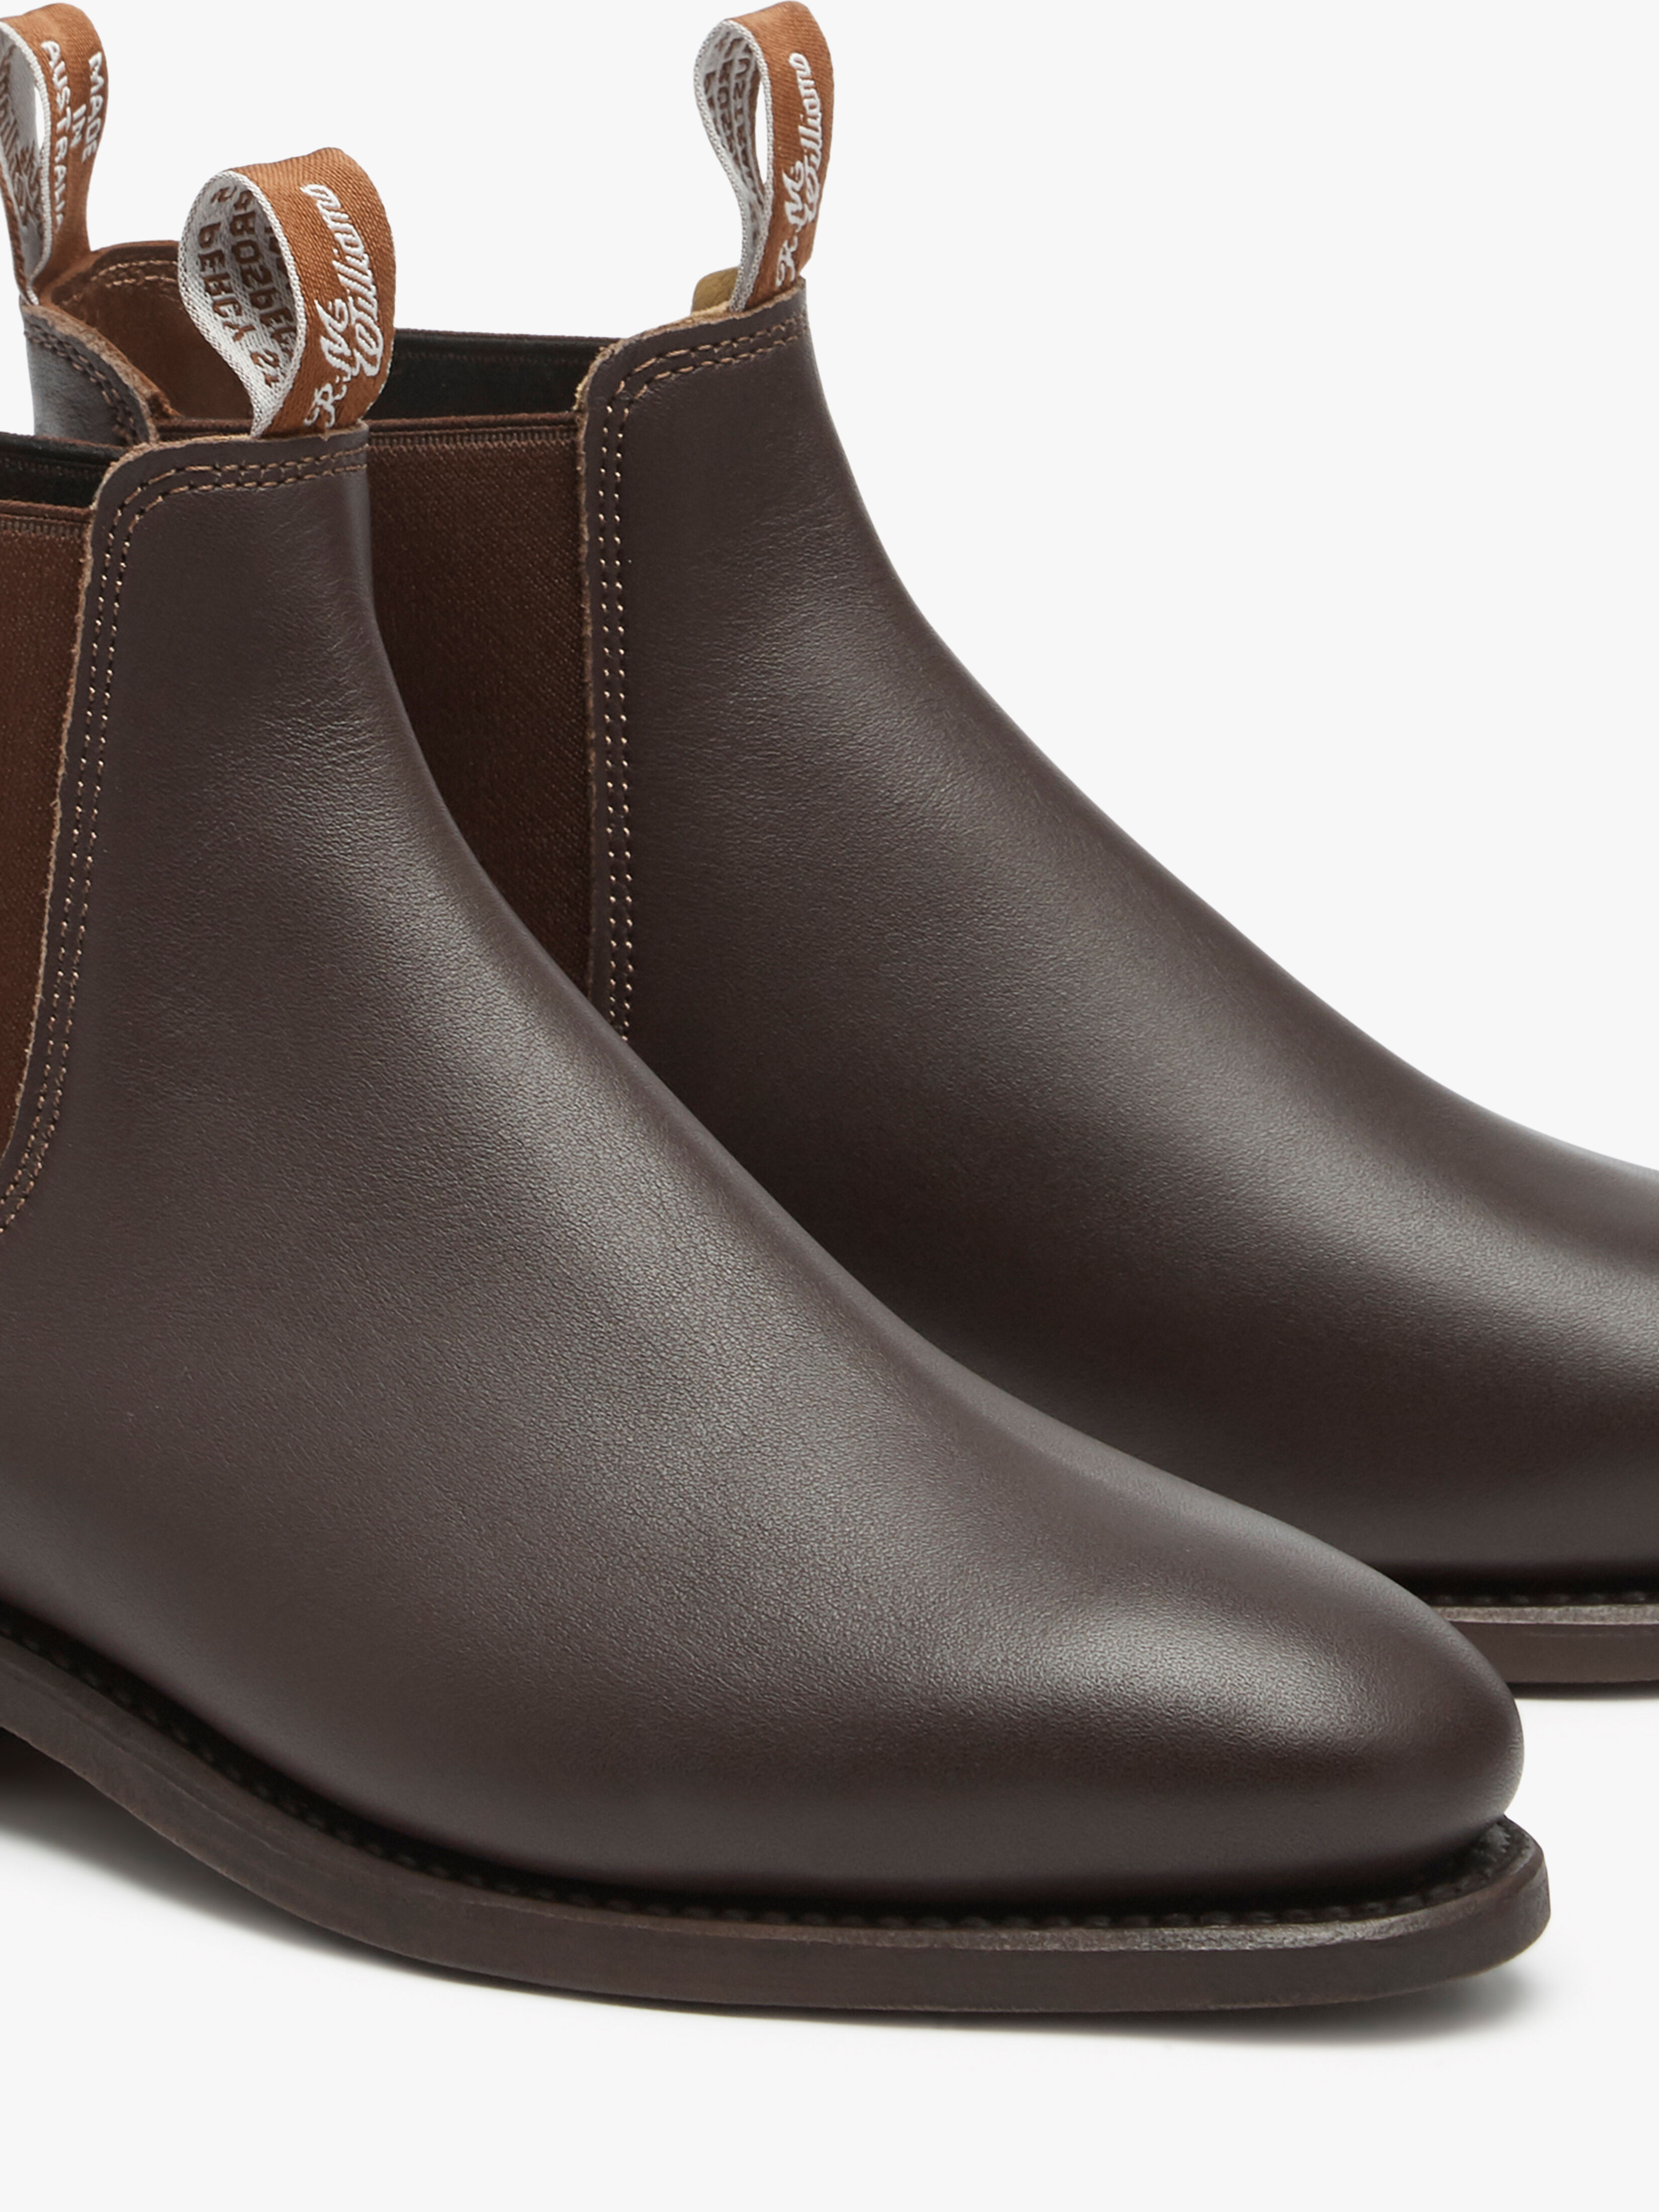 rm williams boots rubber sole